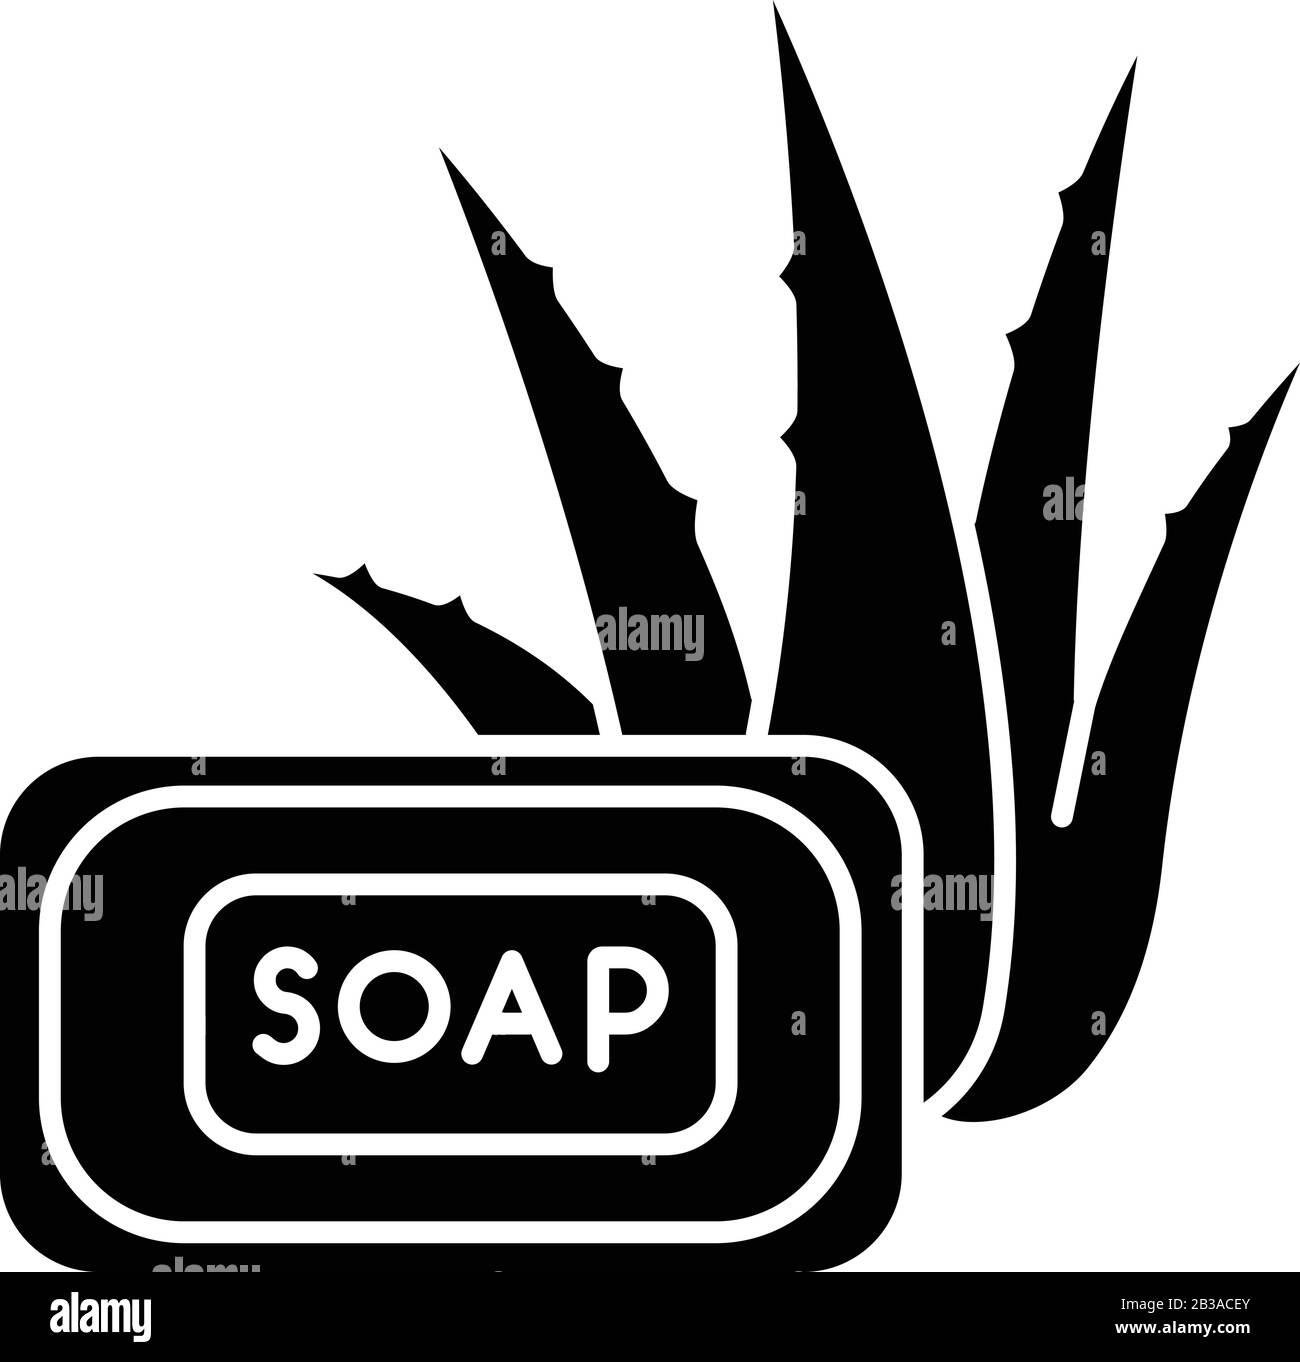 Aloe vera soap black glyph icon. Organic bathing product. Natural cosmetic for hygiene. Plant based product. Cleansing treatment. Silhouette symbol on Stock Vector